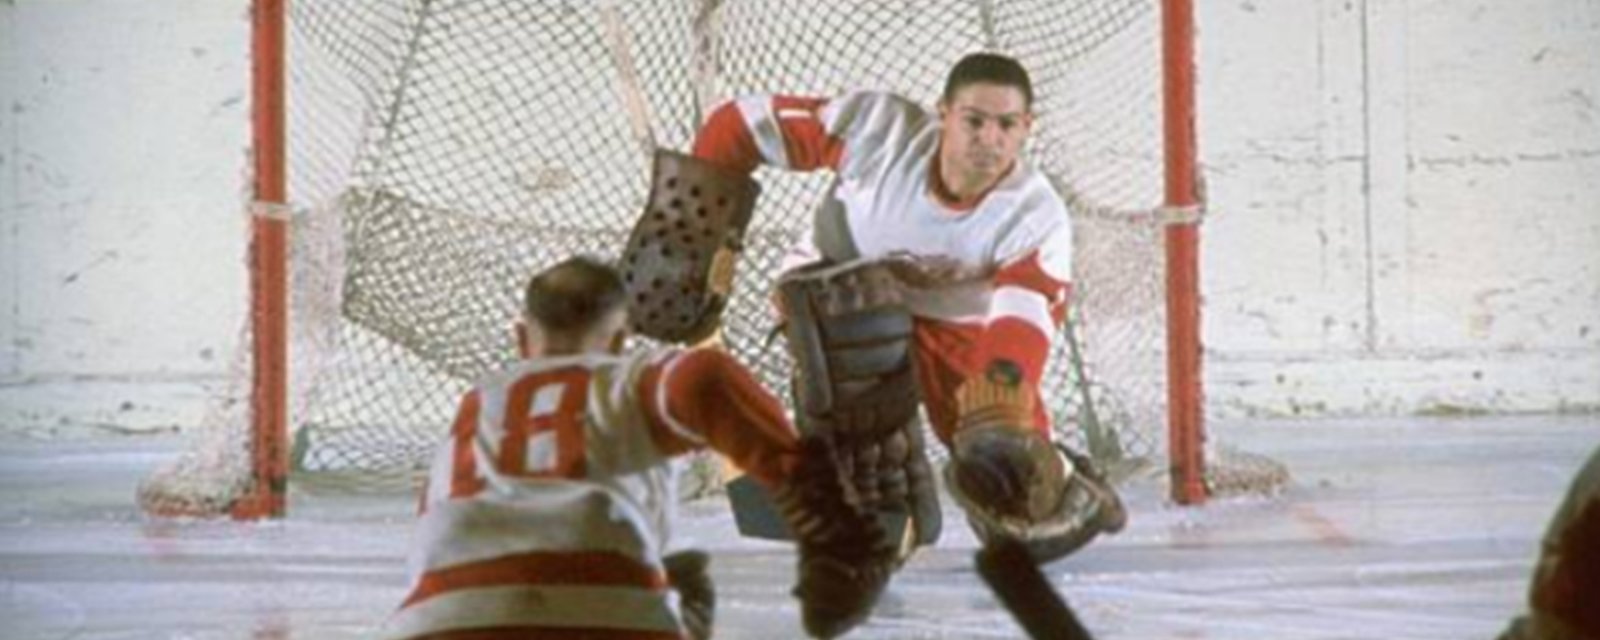 Trailer released for upcoming movie “Goalie” based on the life of legendary Red Wings, Leafs goaltender Terry Sawchuk